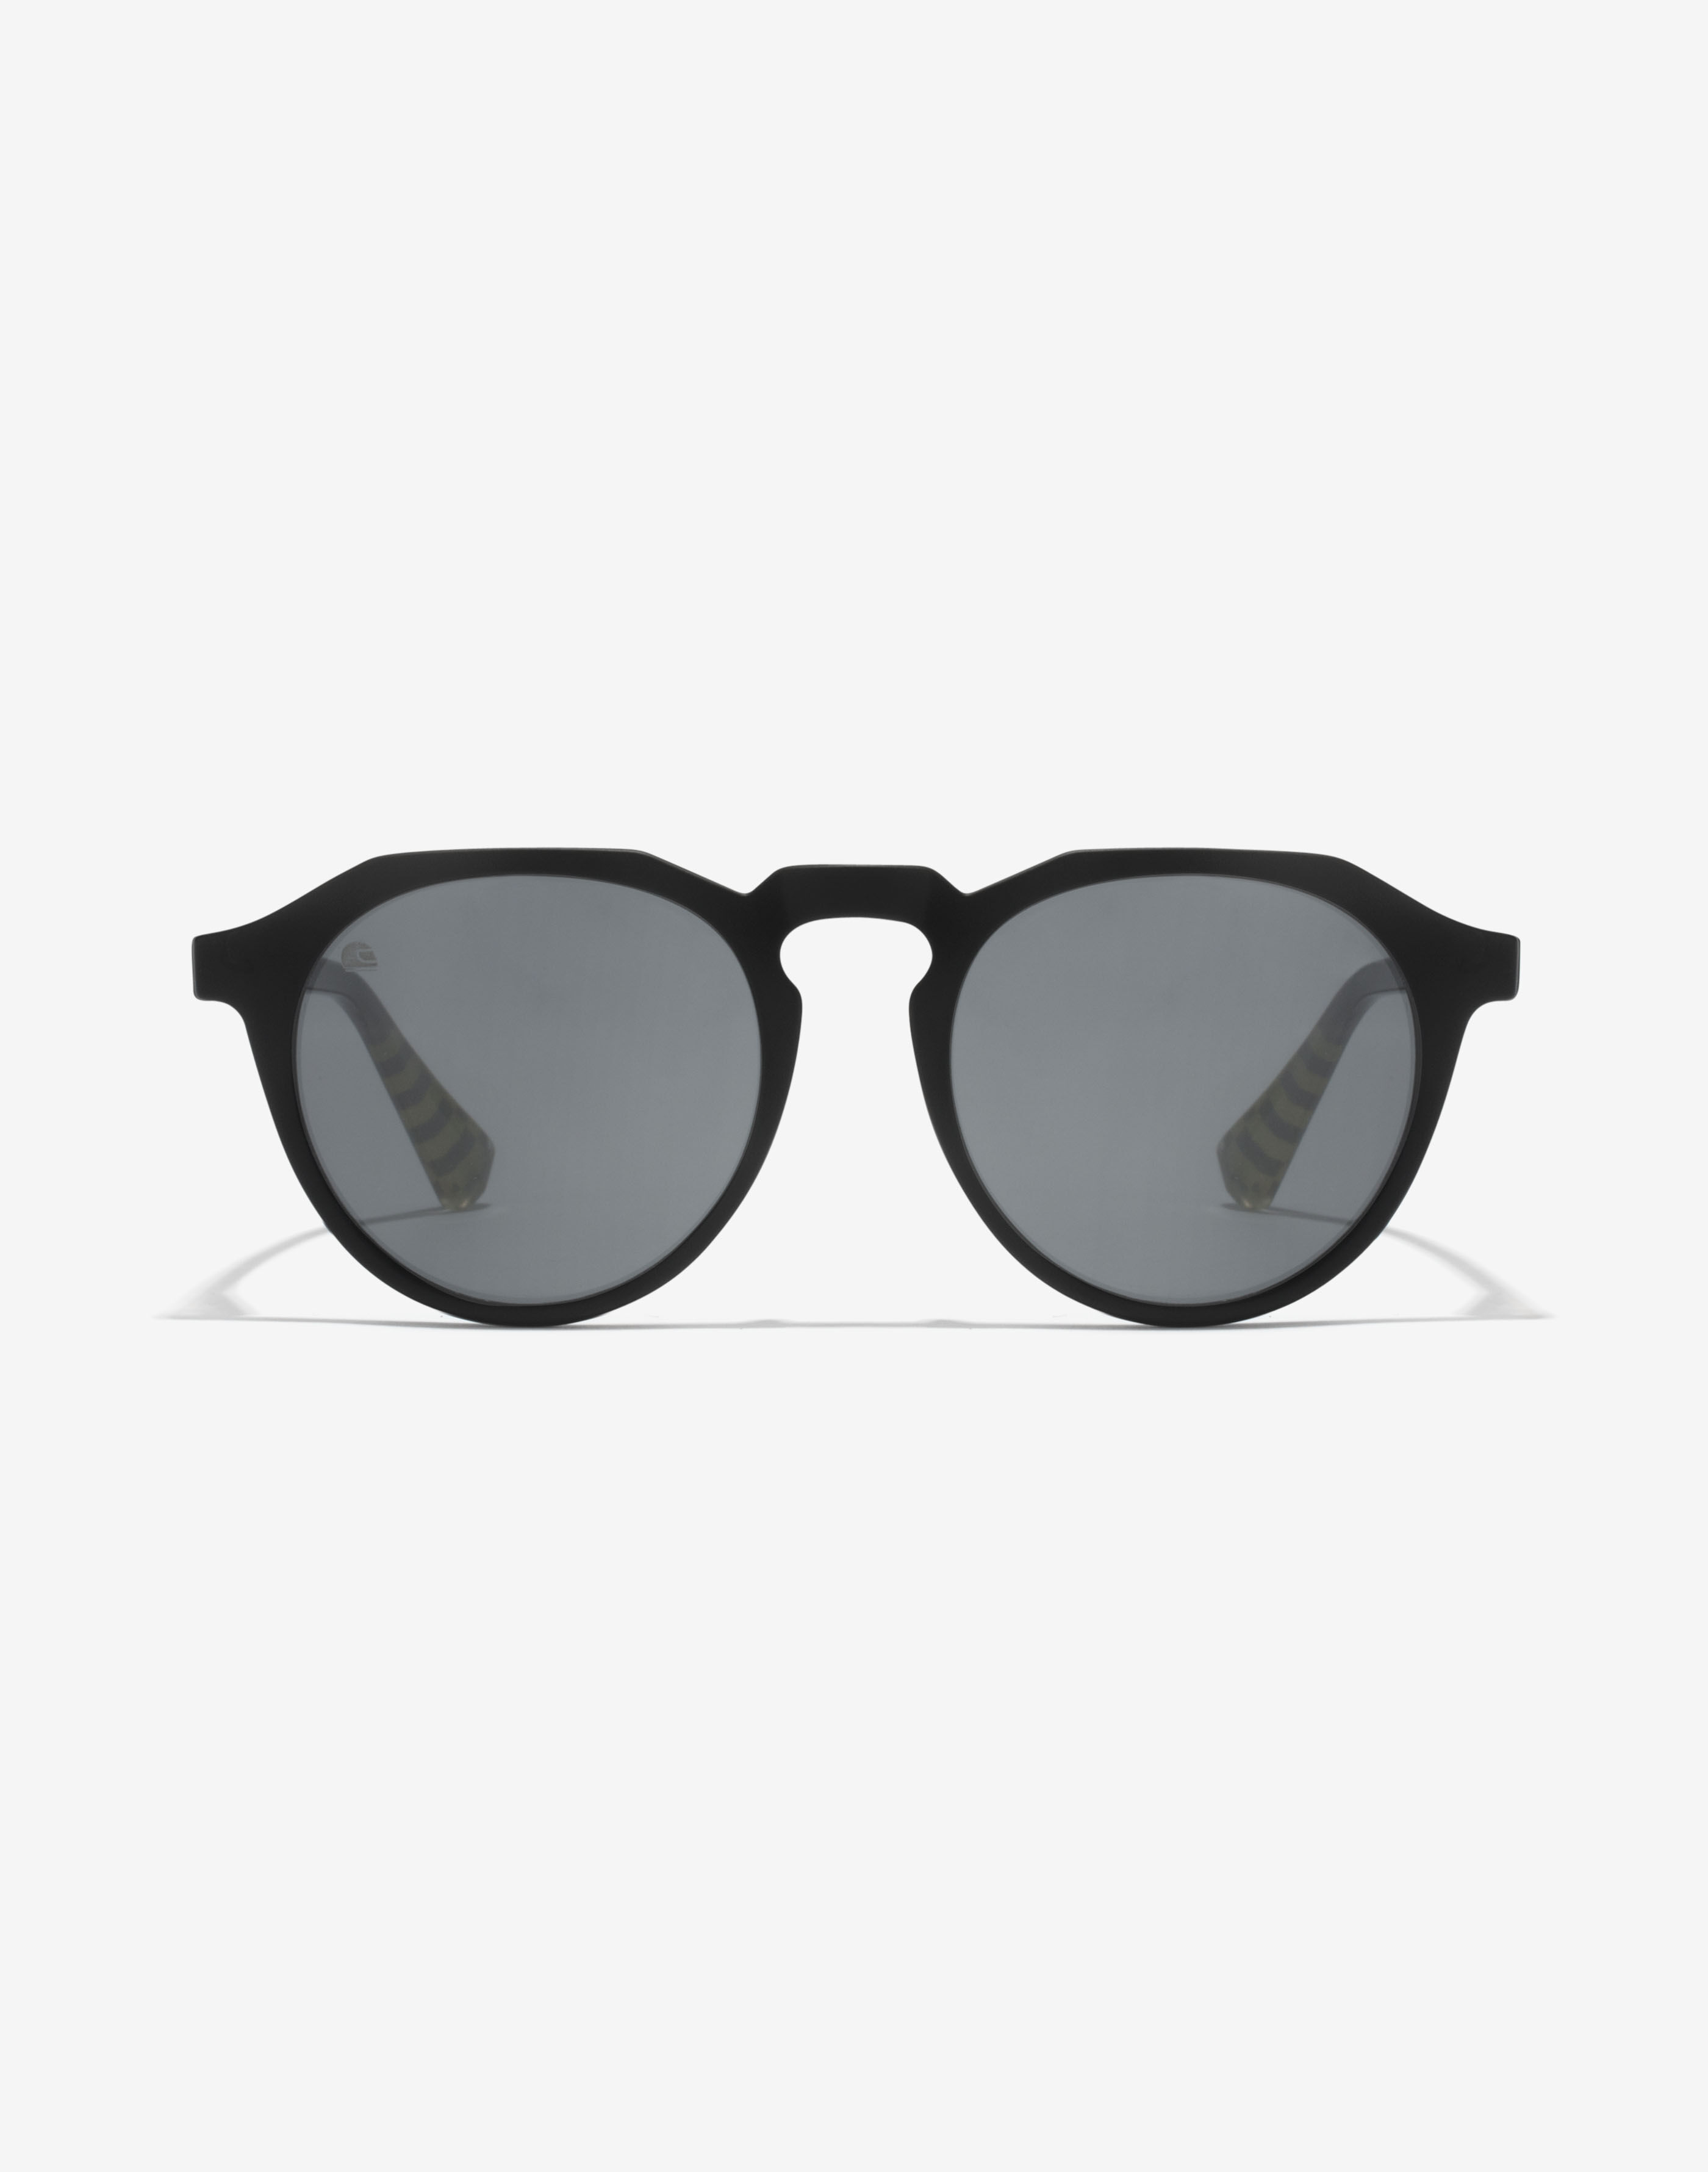 HAWKERS Warwick Sunglasses One Size Unisex-Adult 